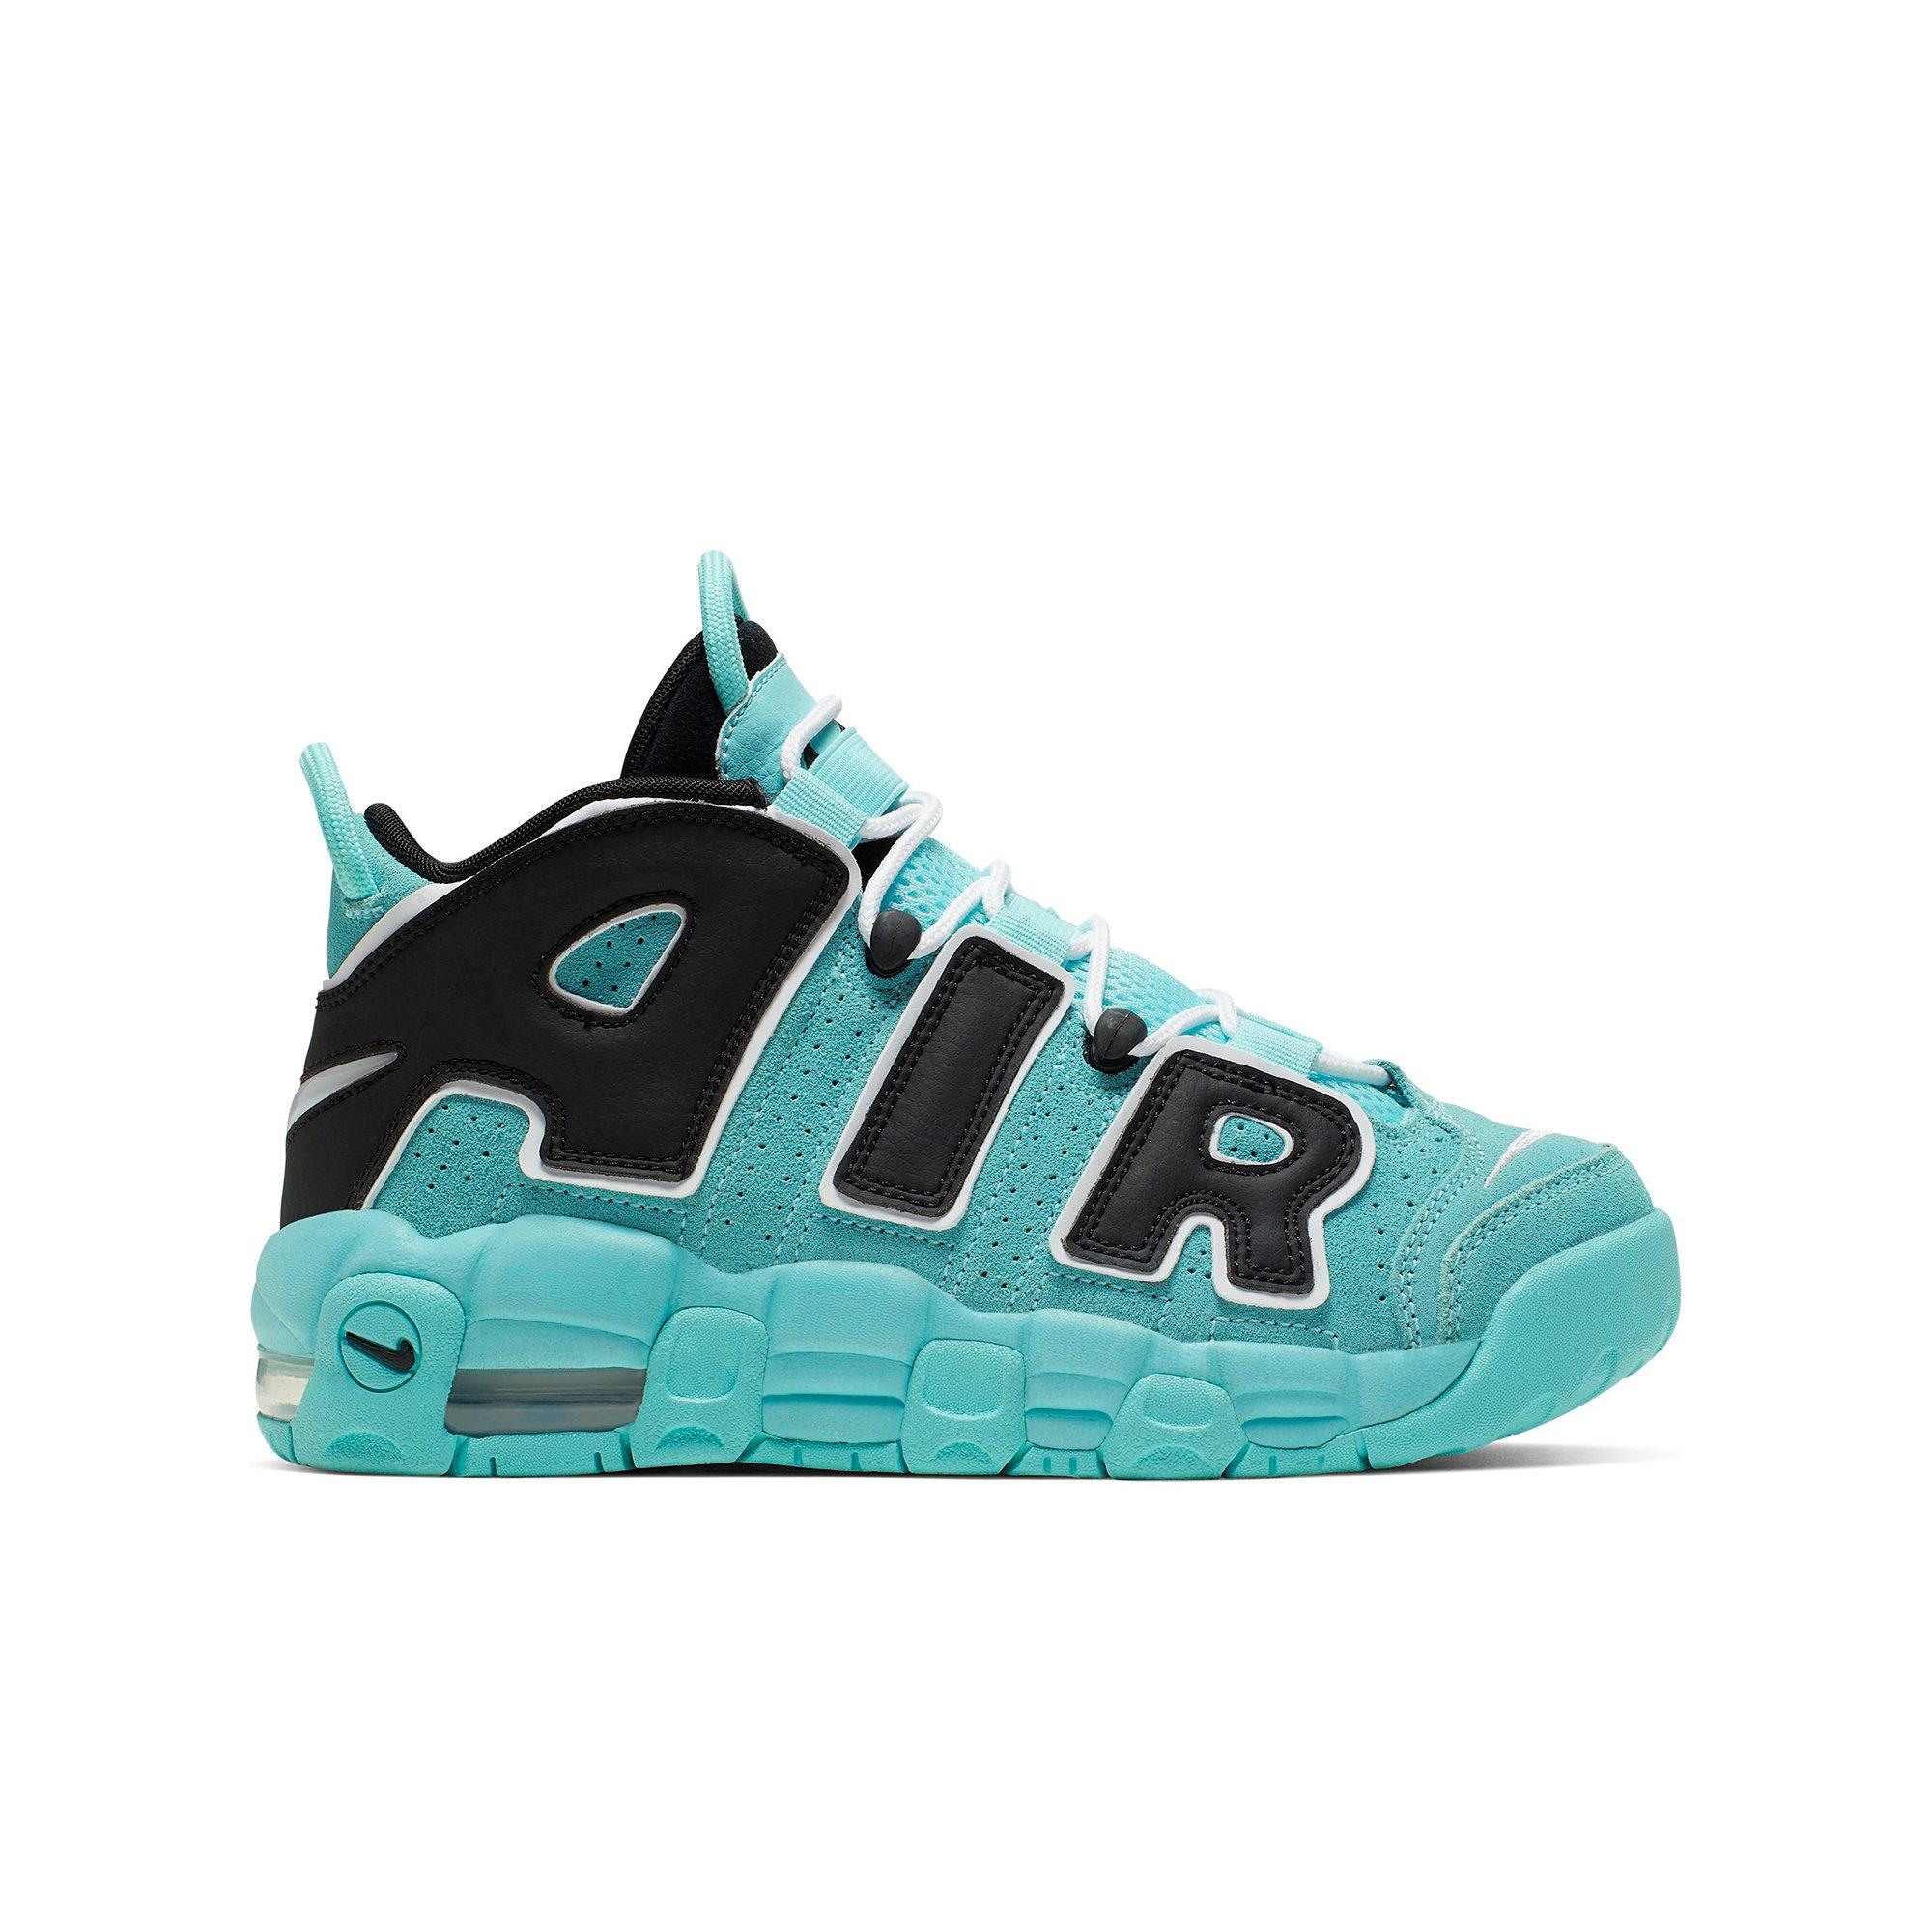 teal kids shoes